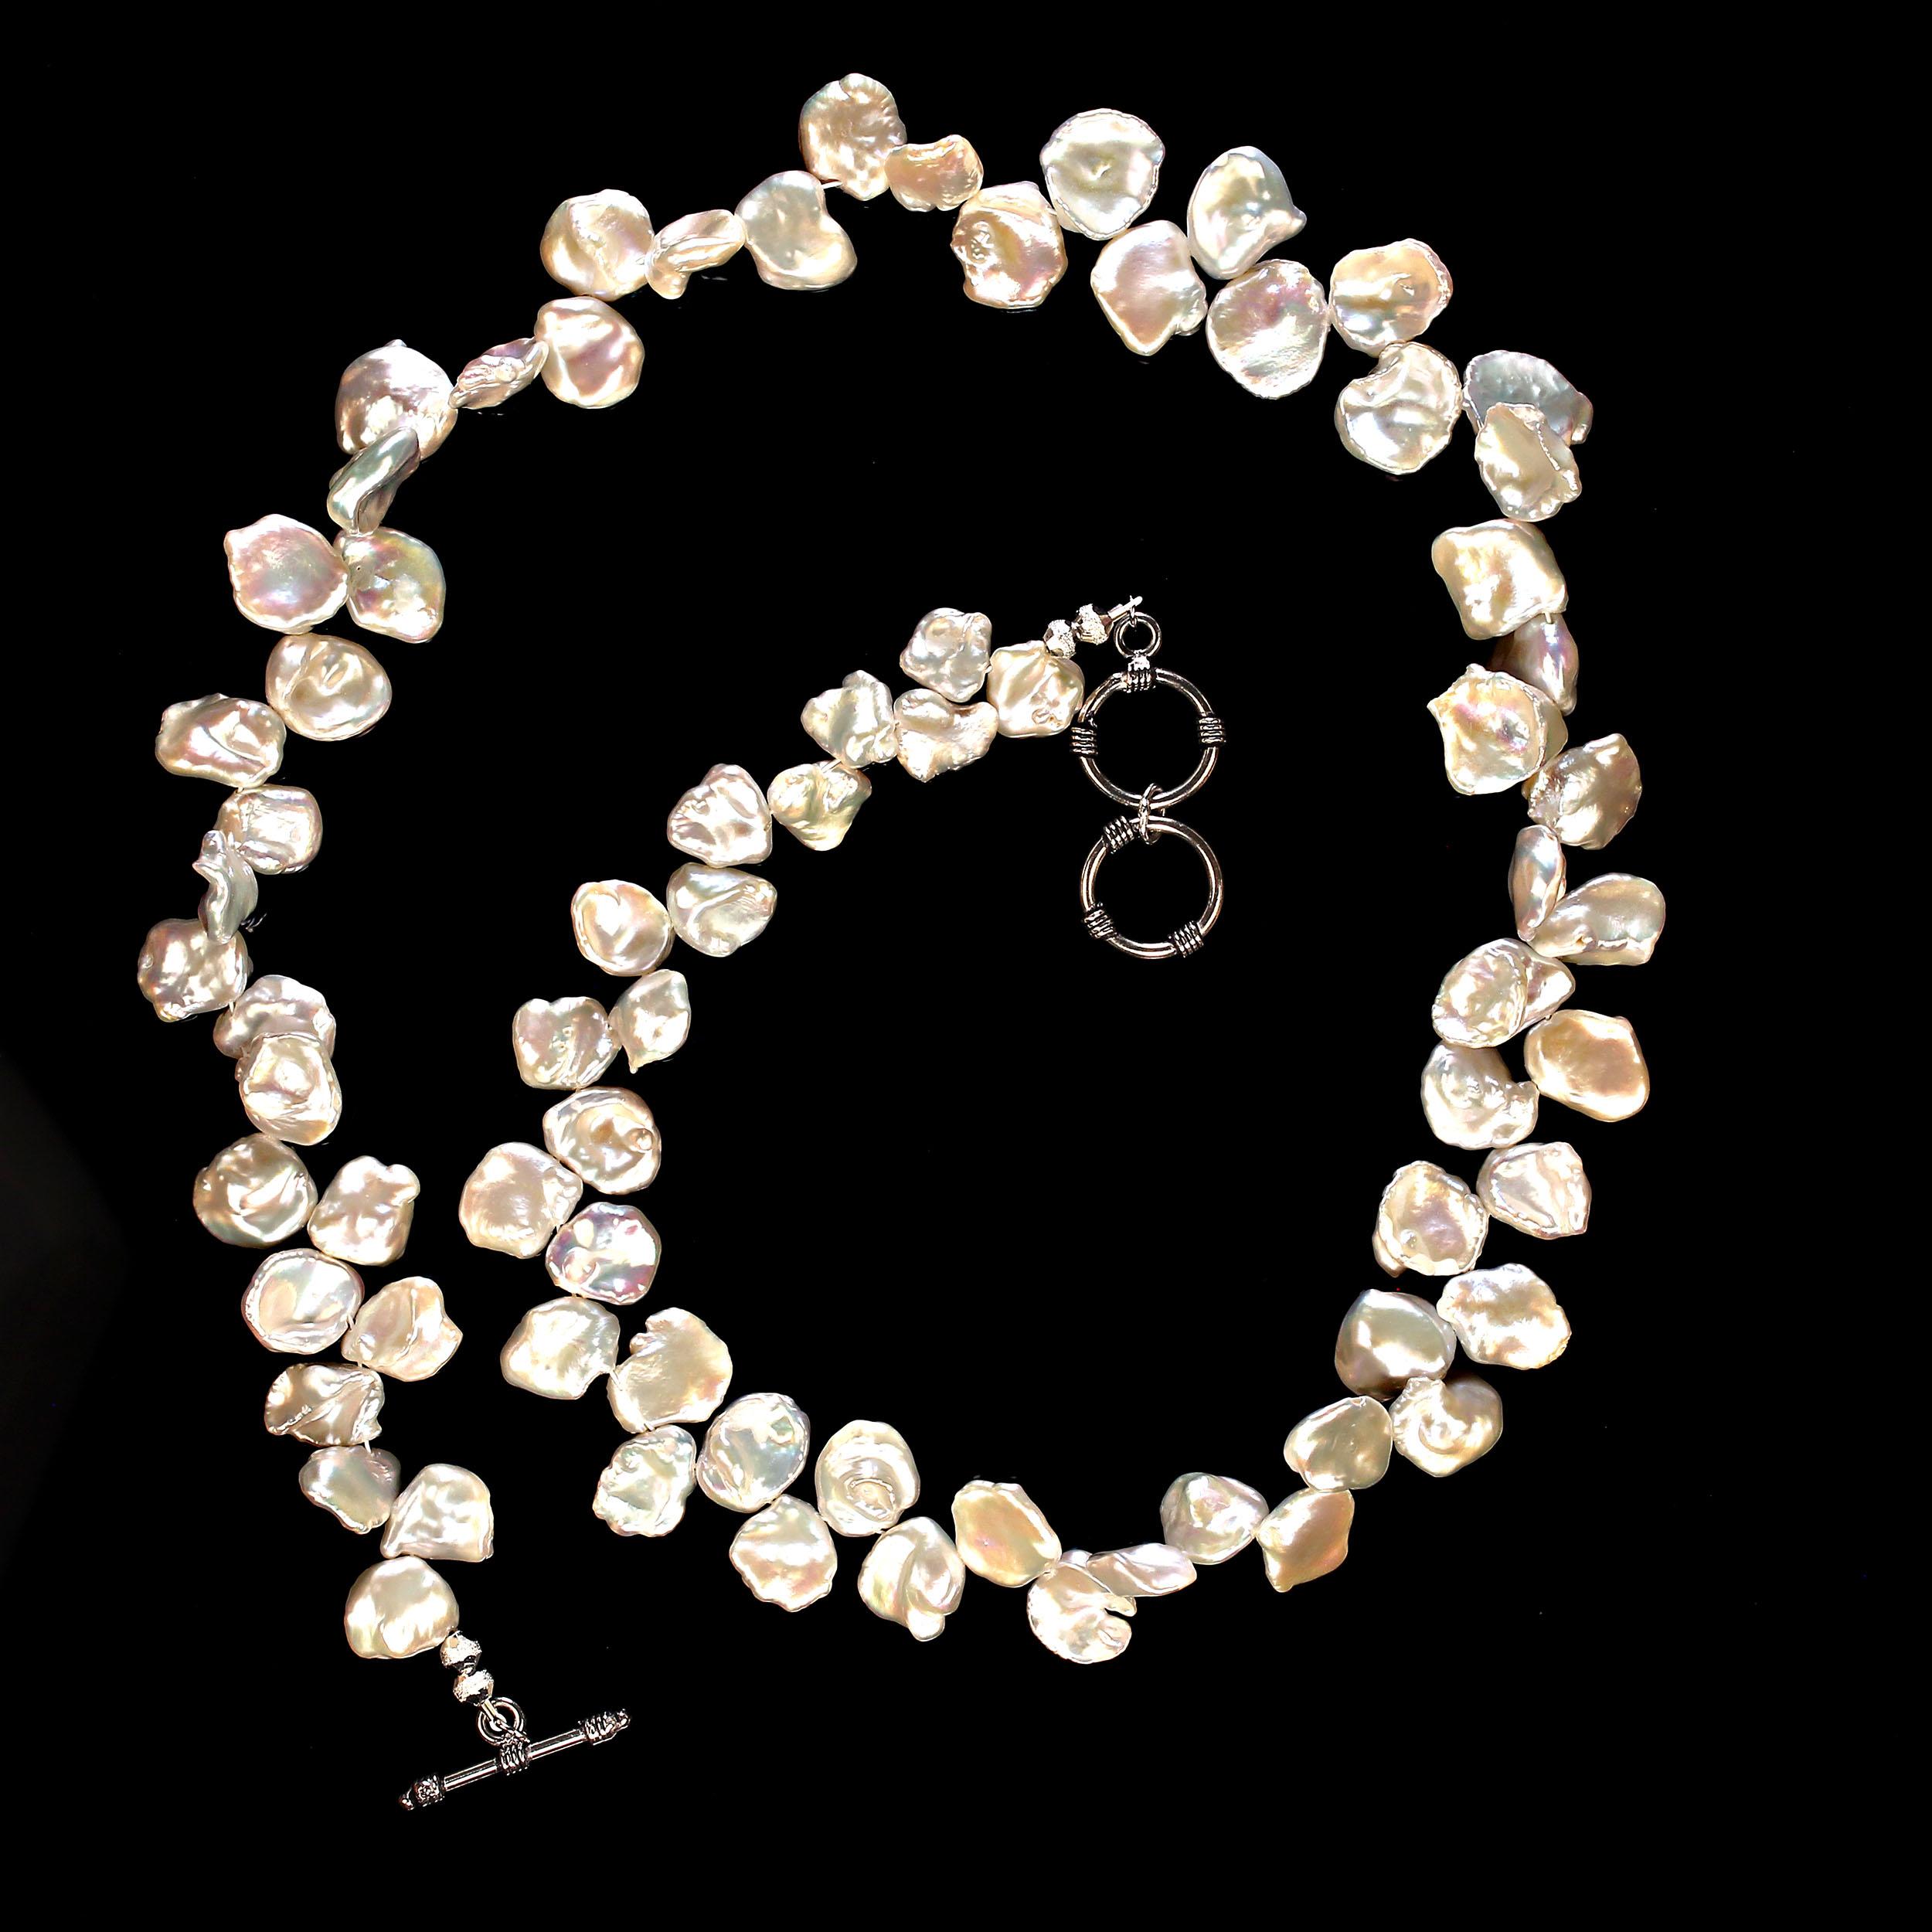 Bead AJD 23 Inch Iridescent White Keshi Pearl Necklace  Perfect Gift For Sale